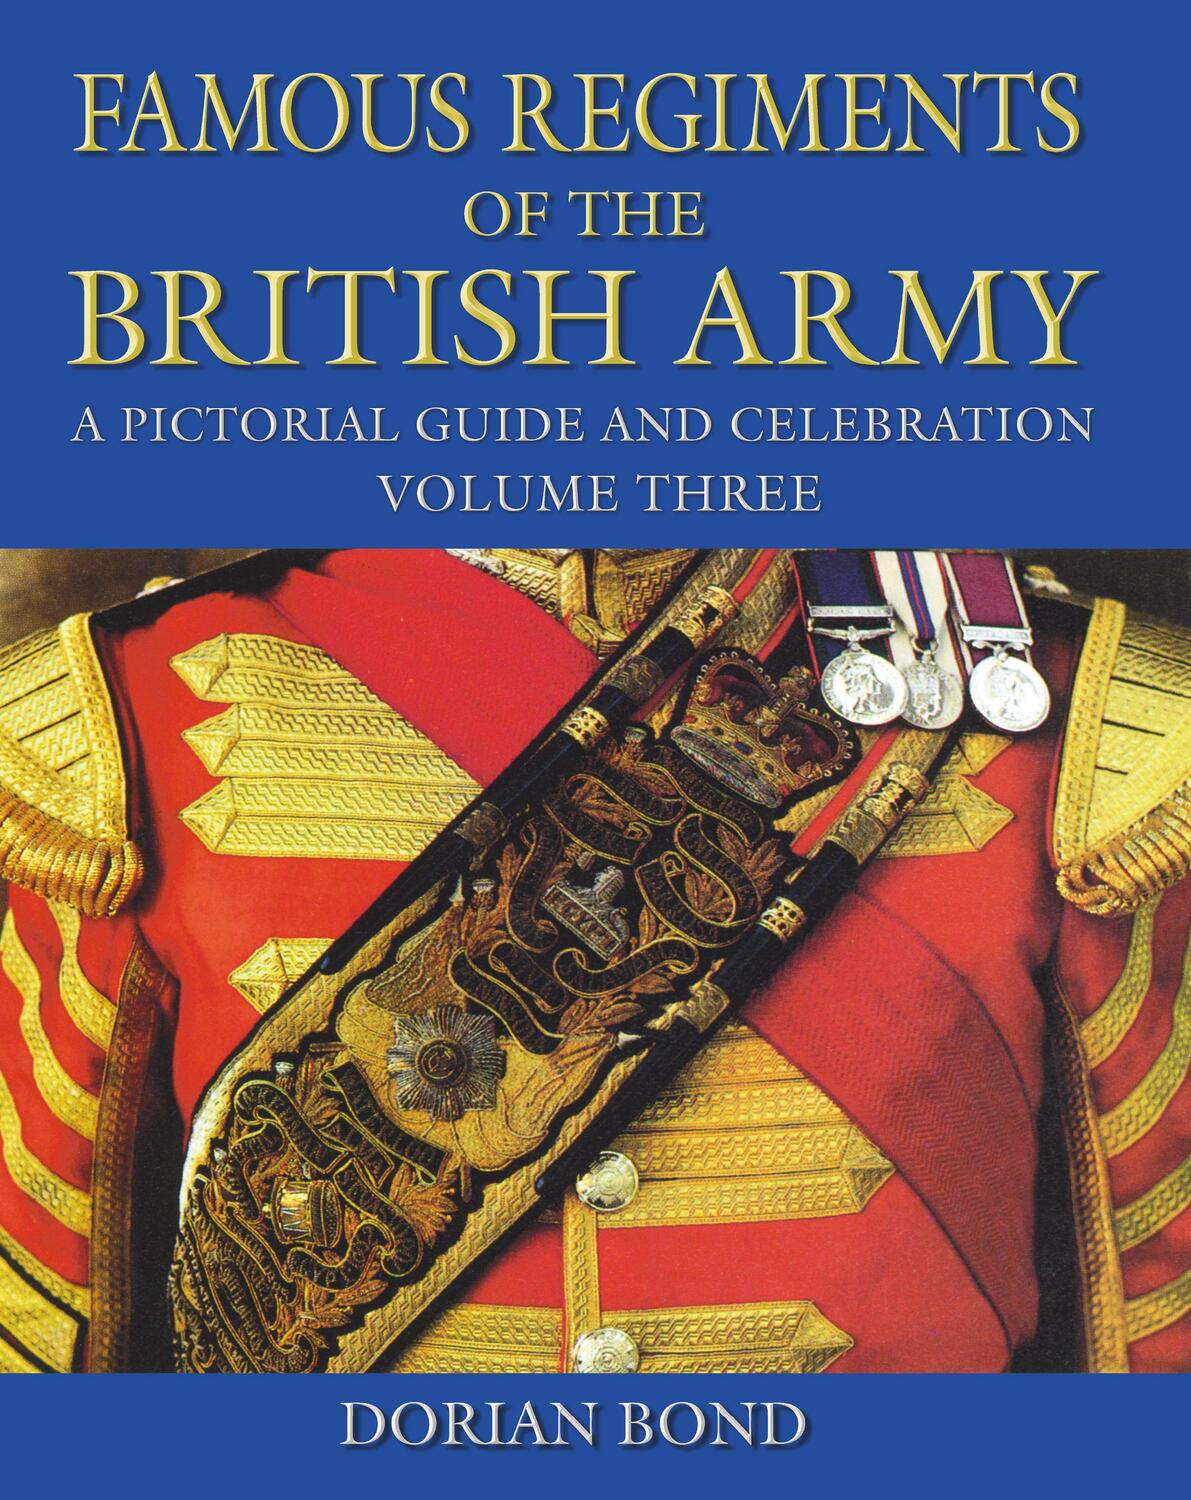 Cover: 9780750968362 | Bond, D: Famous Regiments of the British Army Volume Three | Bond